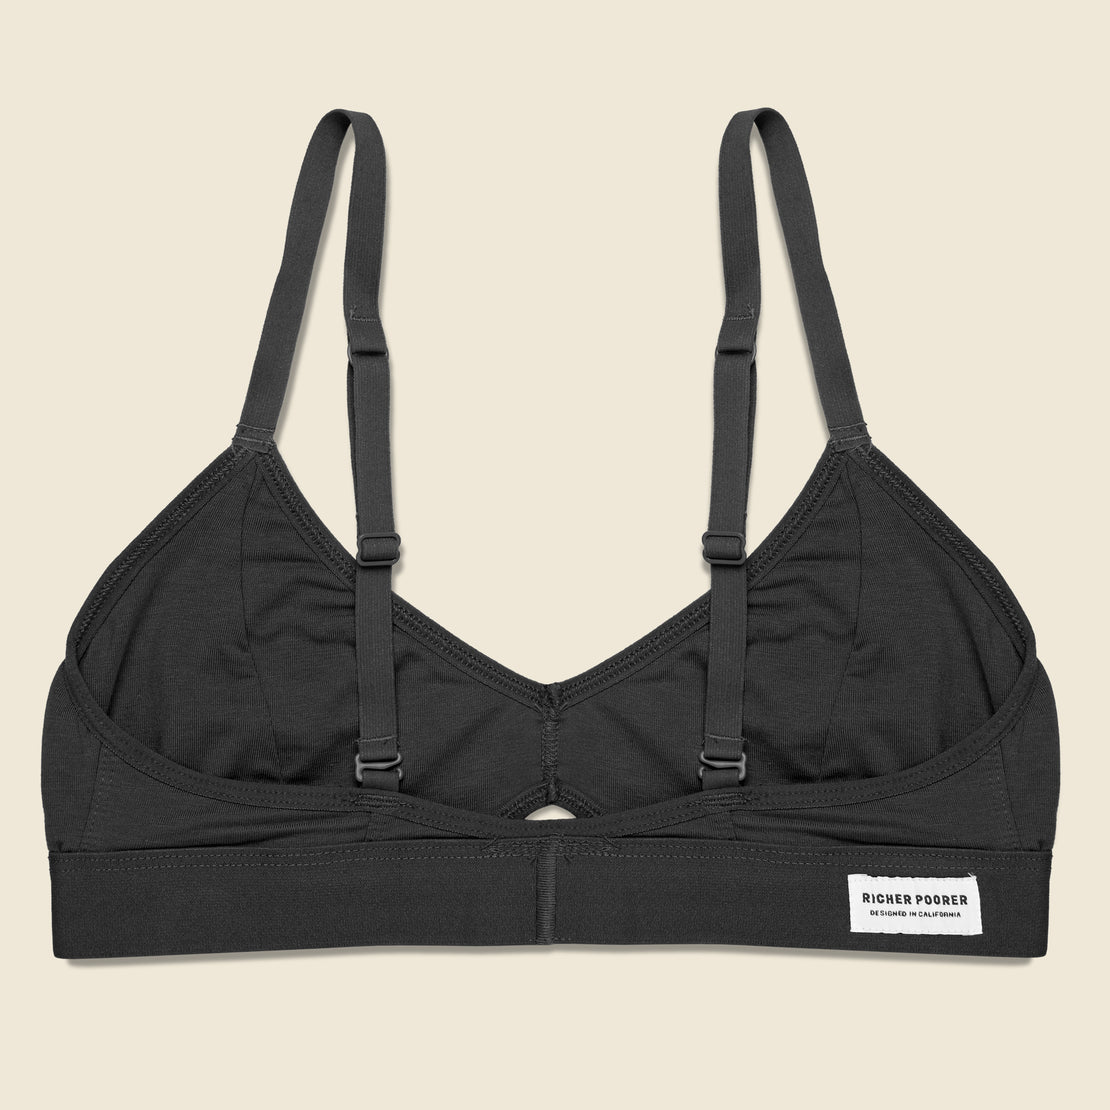 Cutout Bralette - Black - Richer Poorer - STAG Provisions - W - Tops - Sleeveless